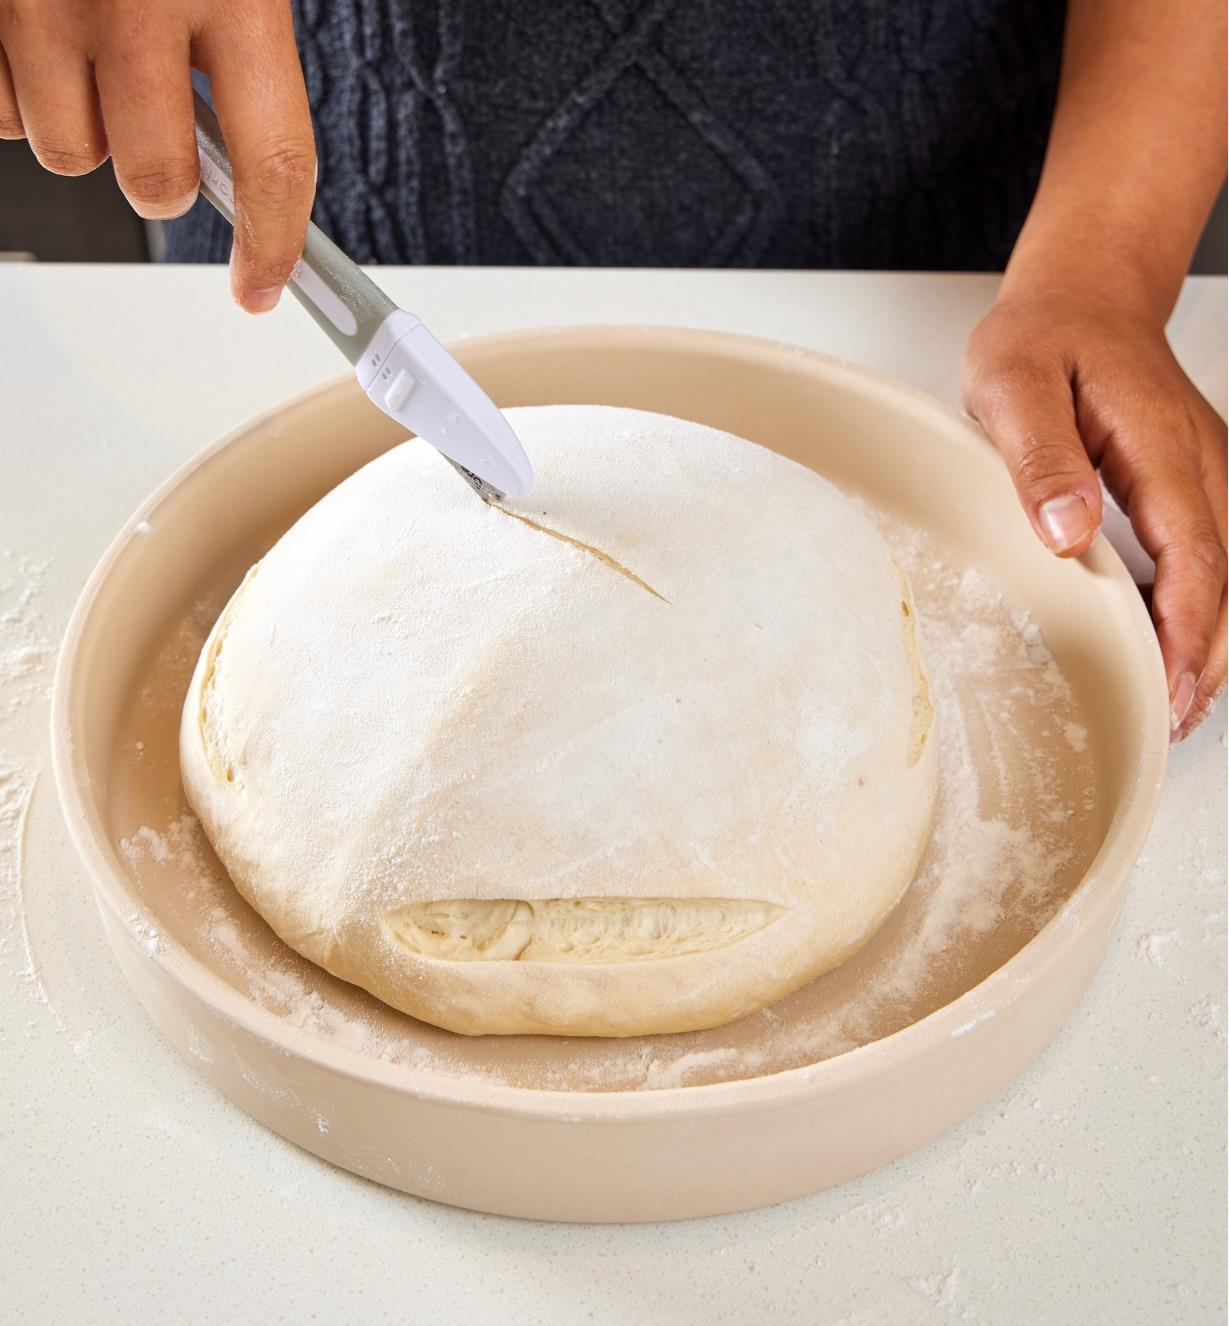 Scoring the top of dough in the base of the bread-baking cloche